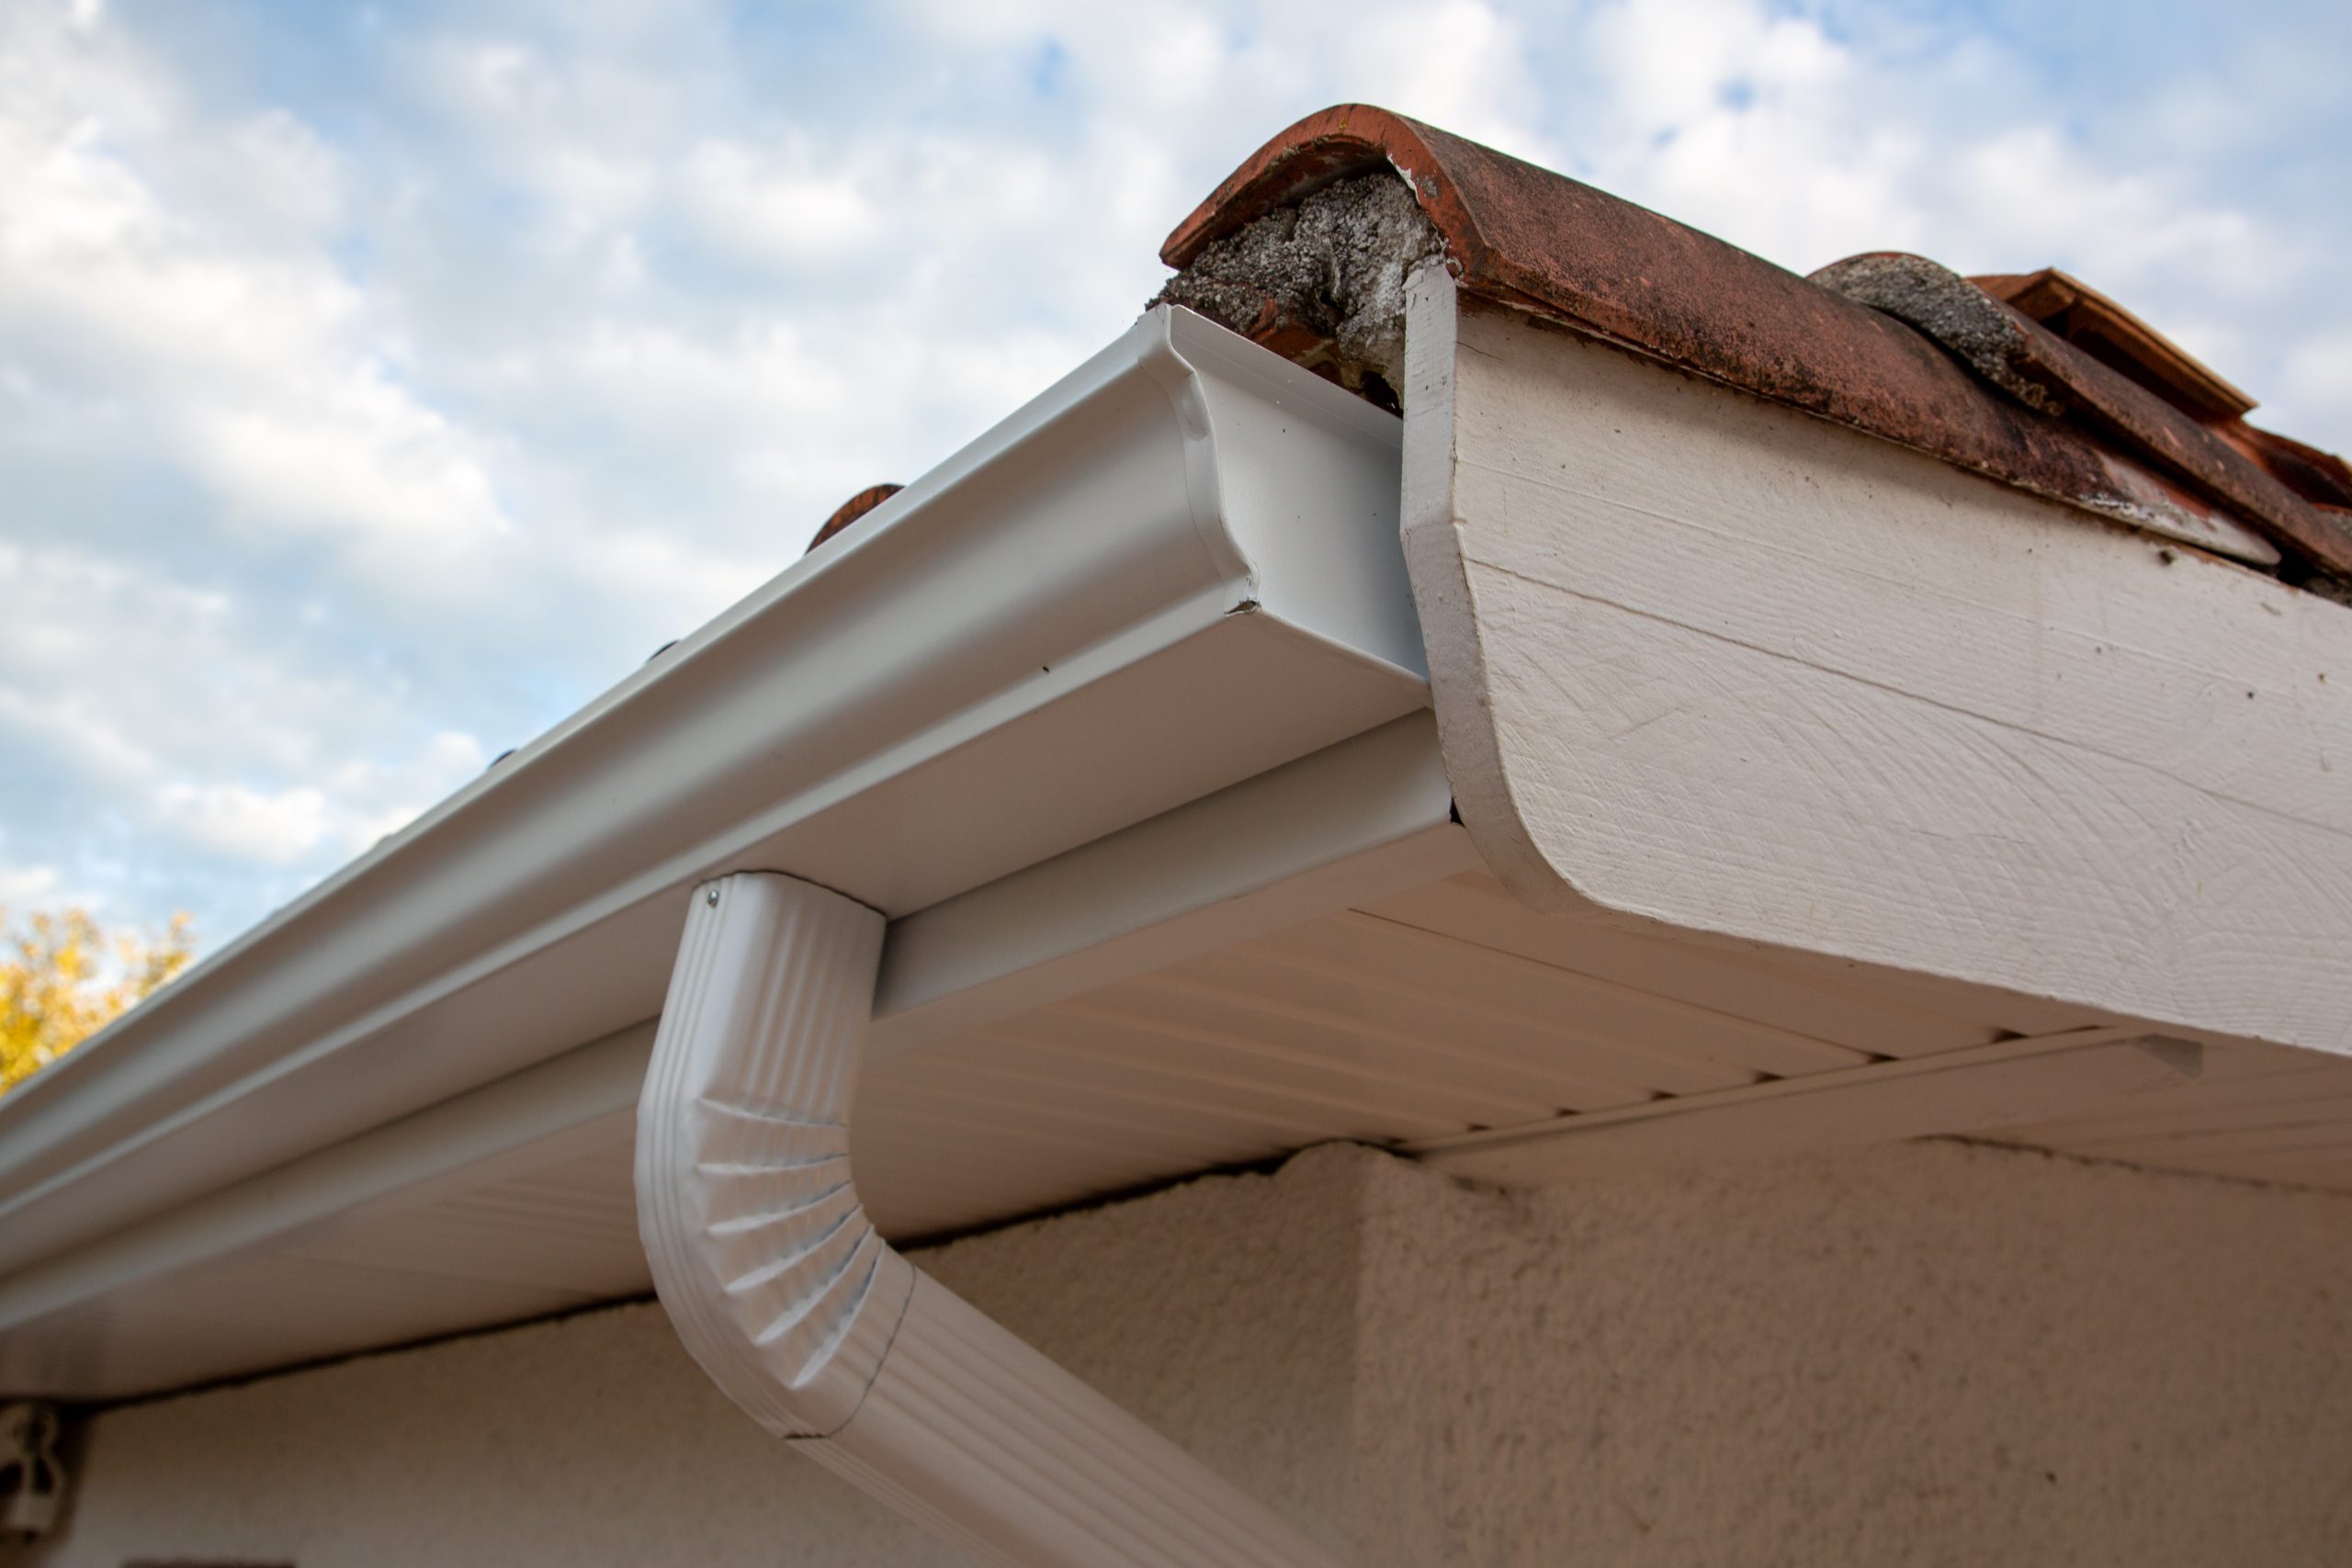 Gravity IBR Roofing & Building Supplies: Your Top Choice for Quality Seamless Gutters in Zimbabwe